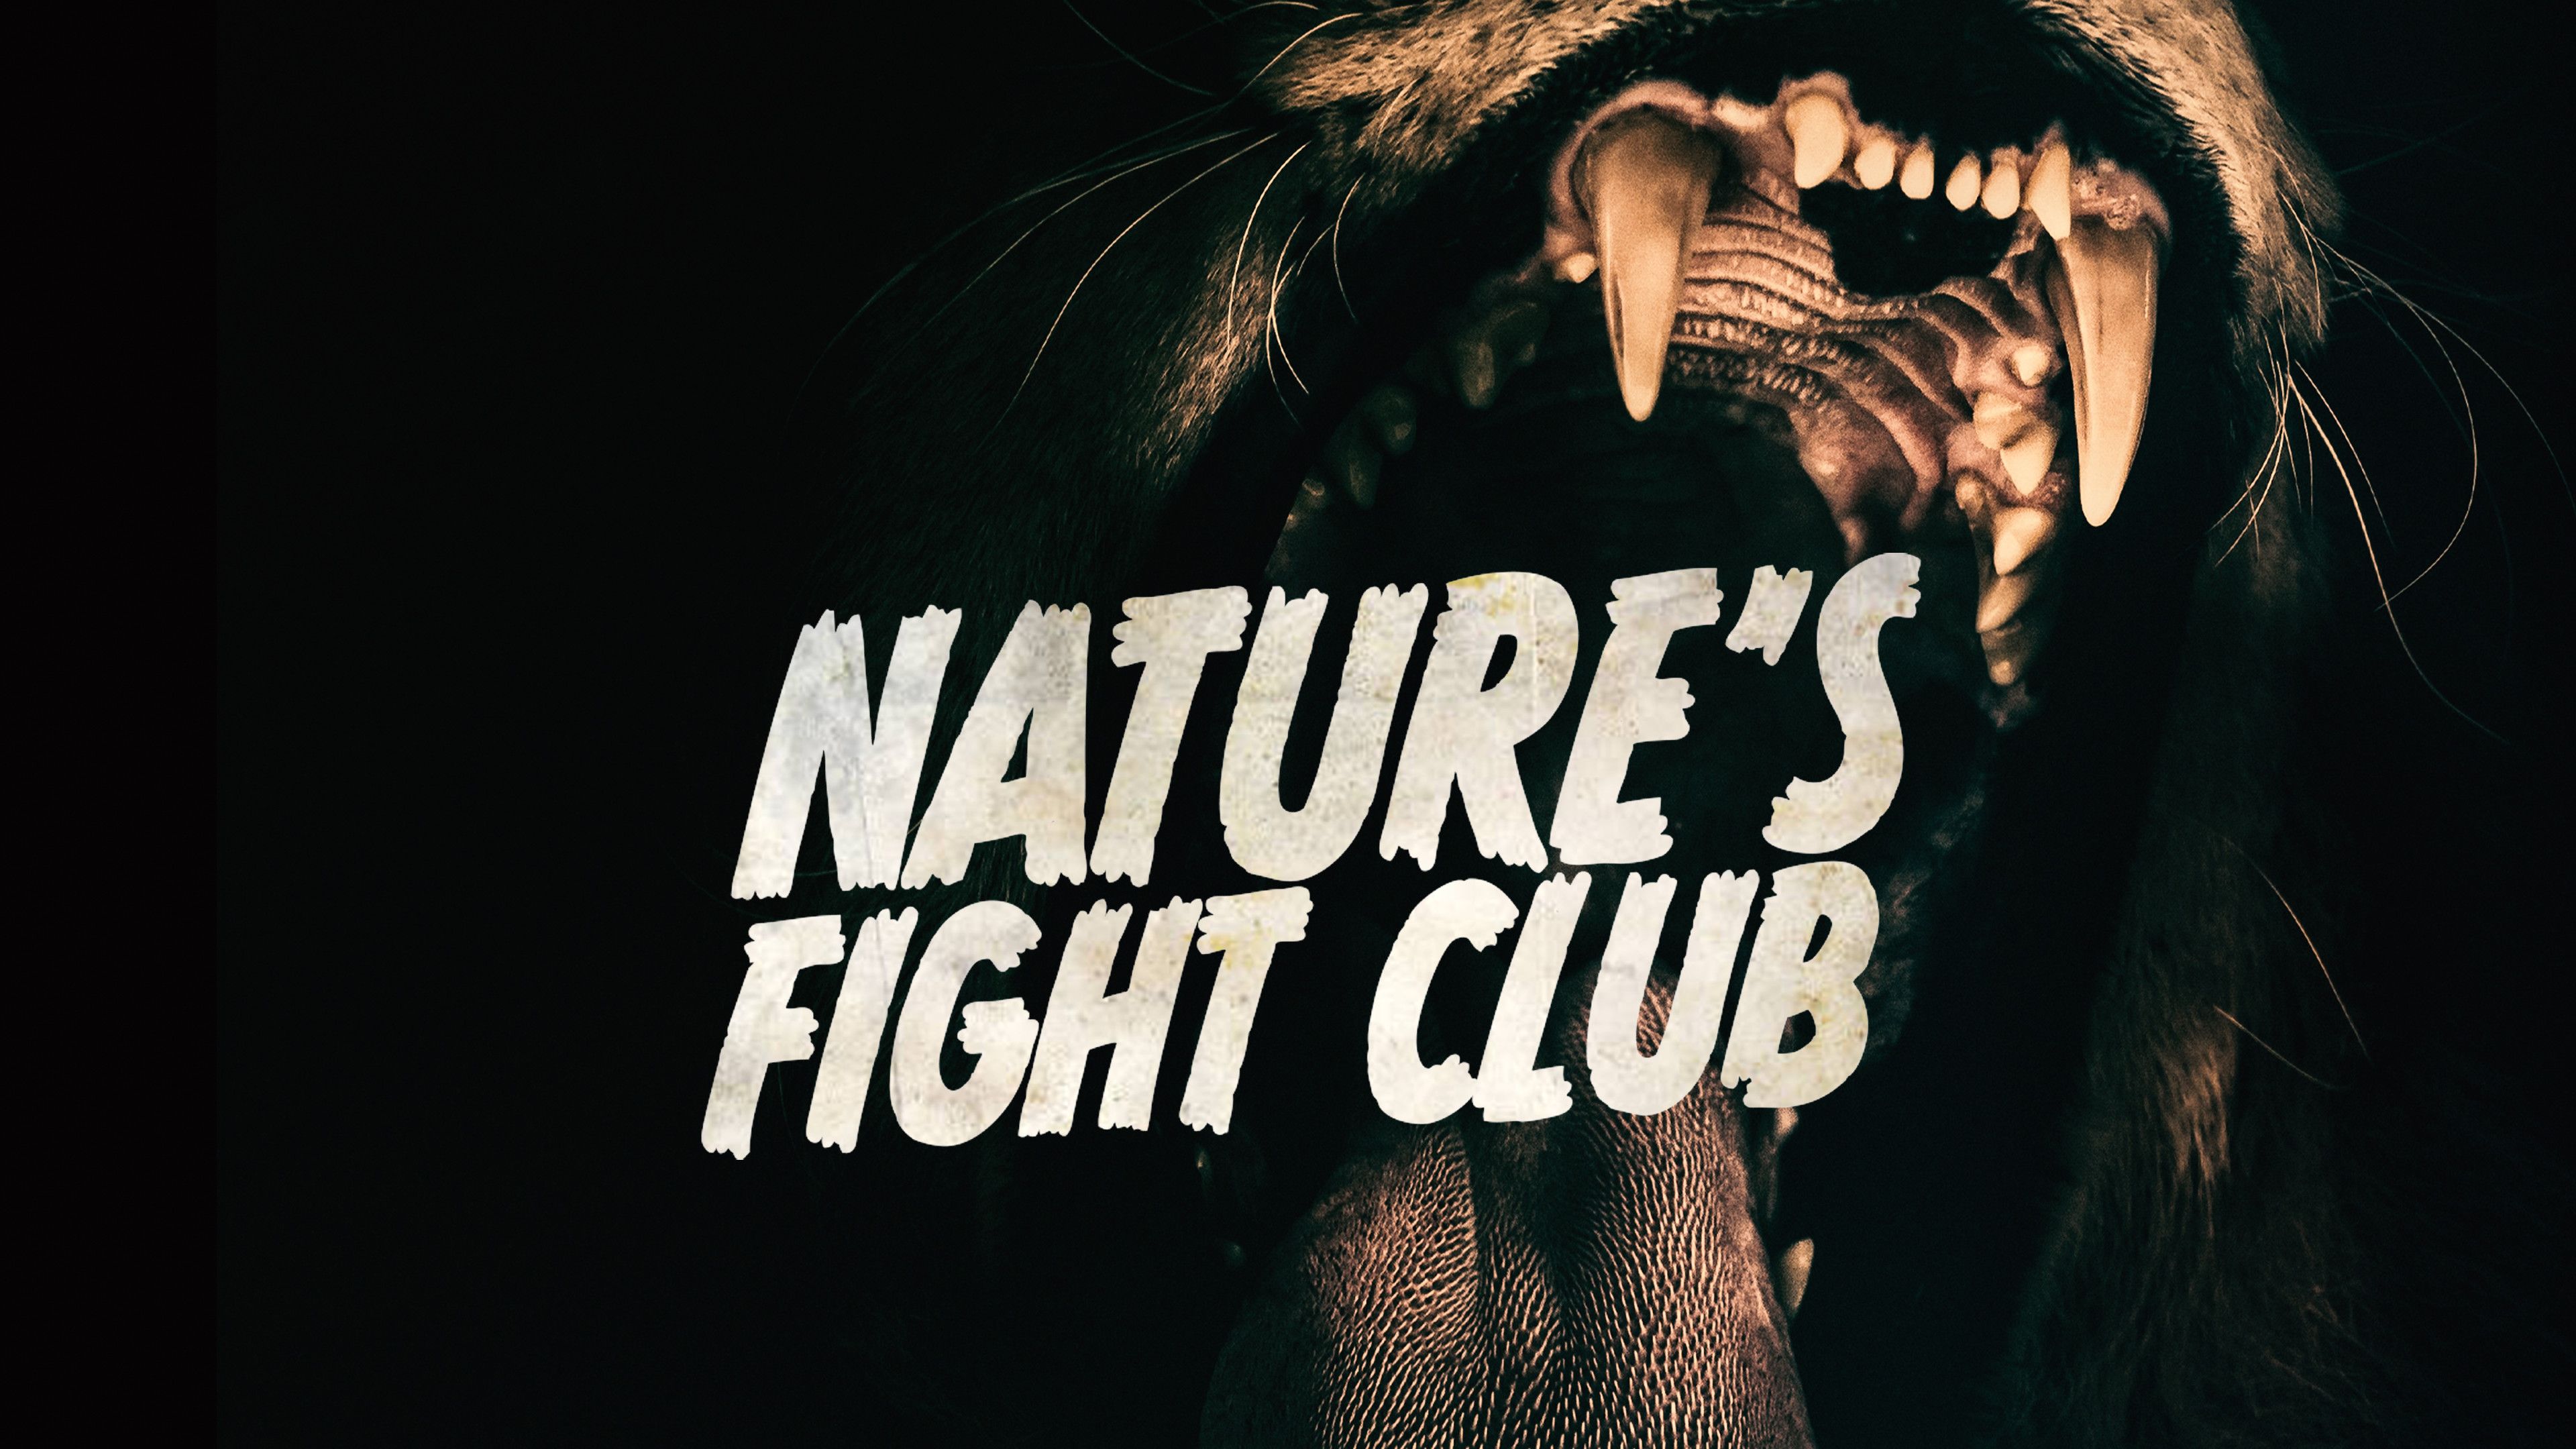 Nature's Fight Club